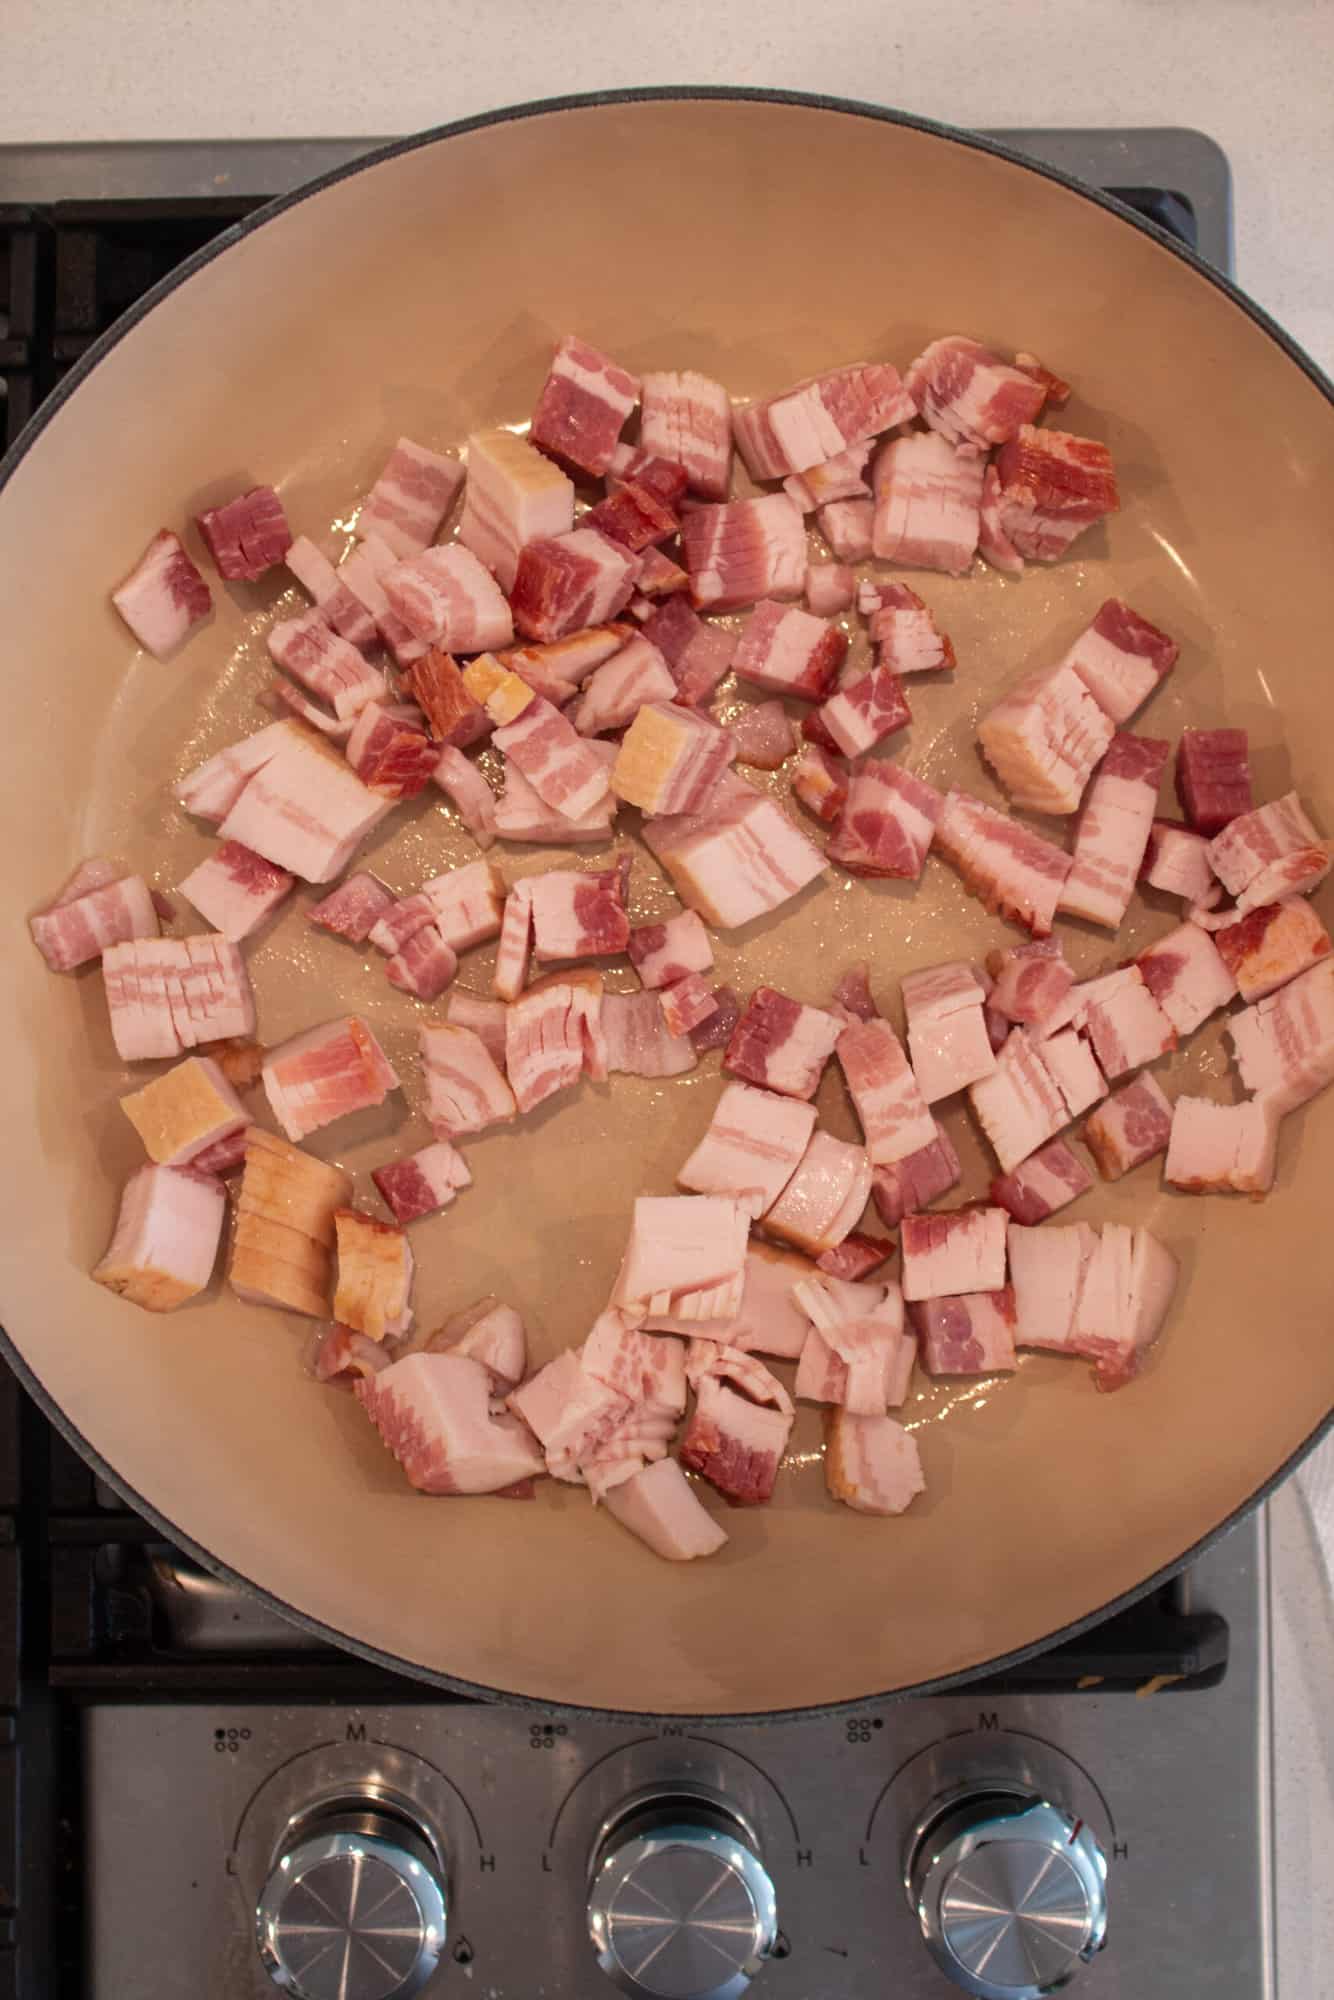 Diced bacon being cooked in a large skillet.